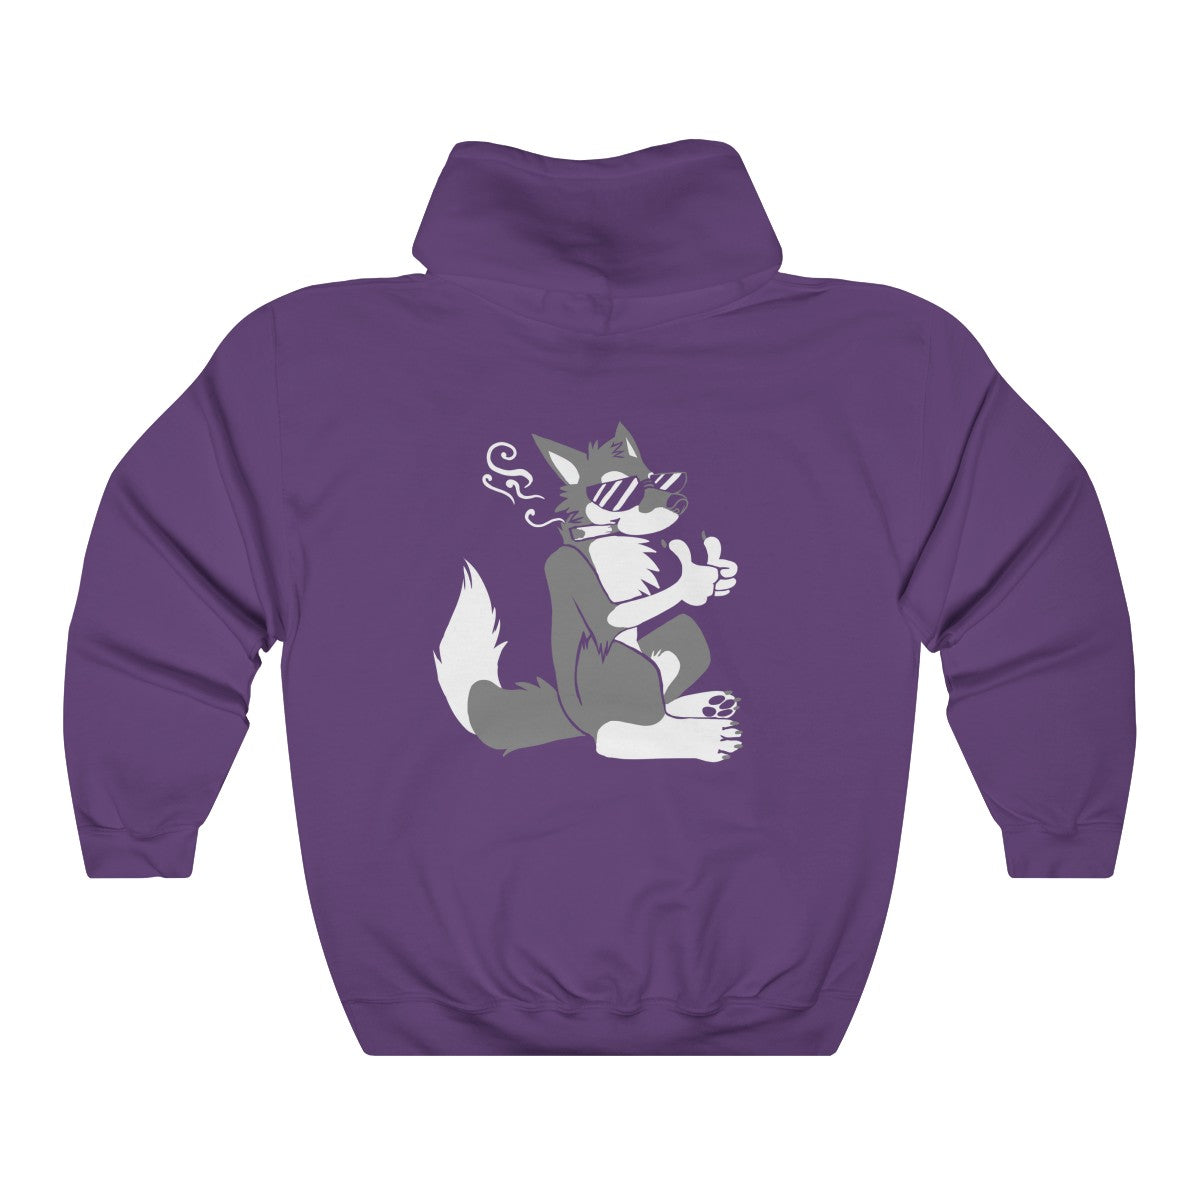 Chill Out - Hoodie Hoodie Dire Creatures Purple S 